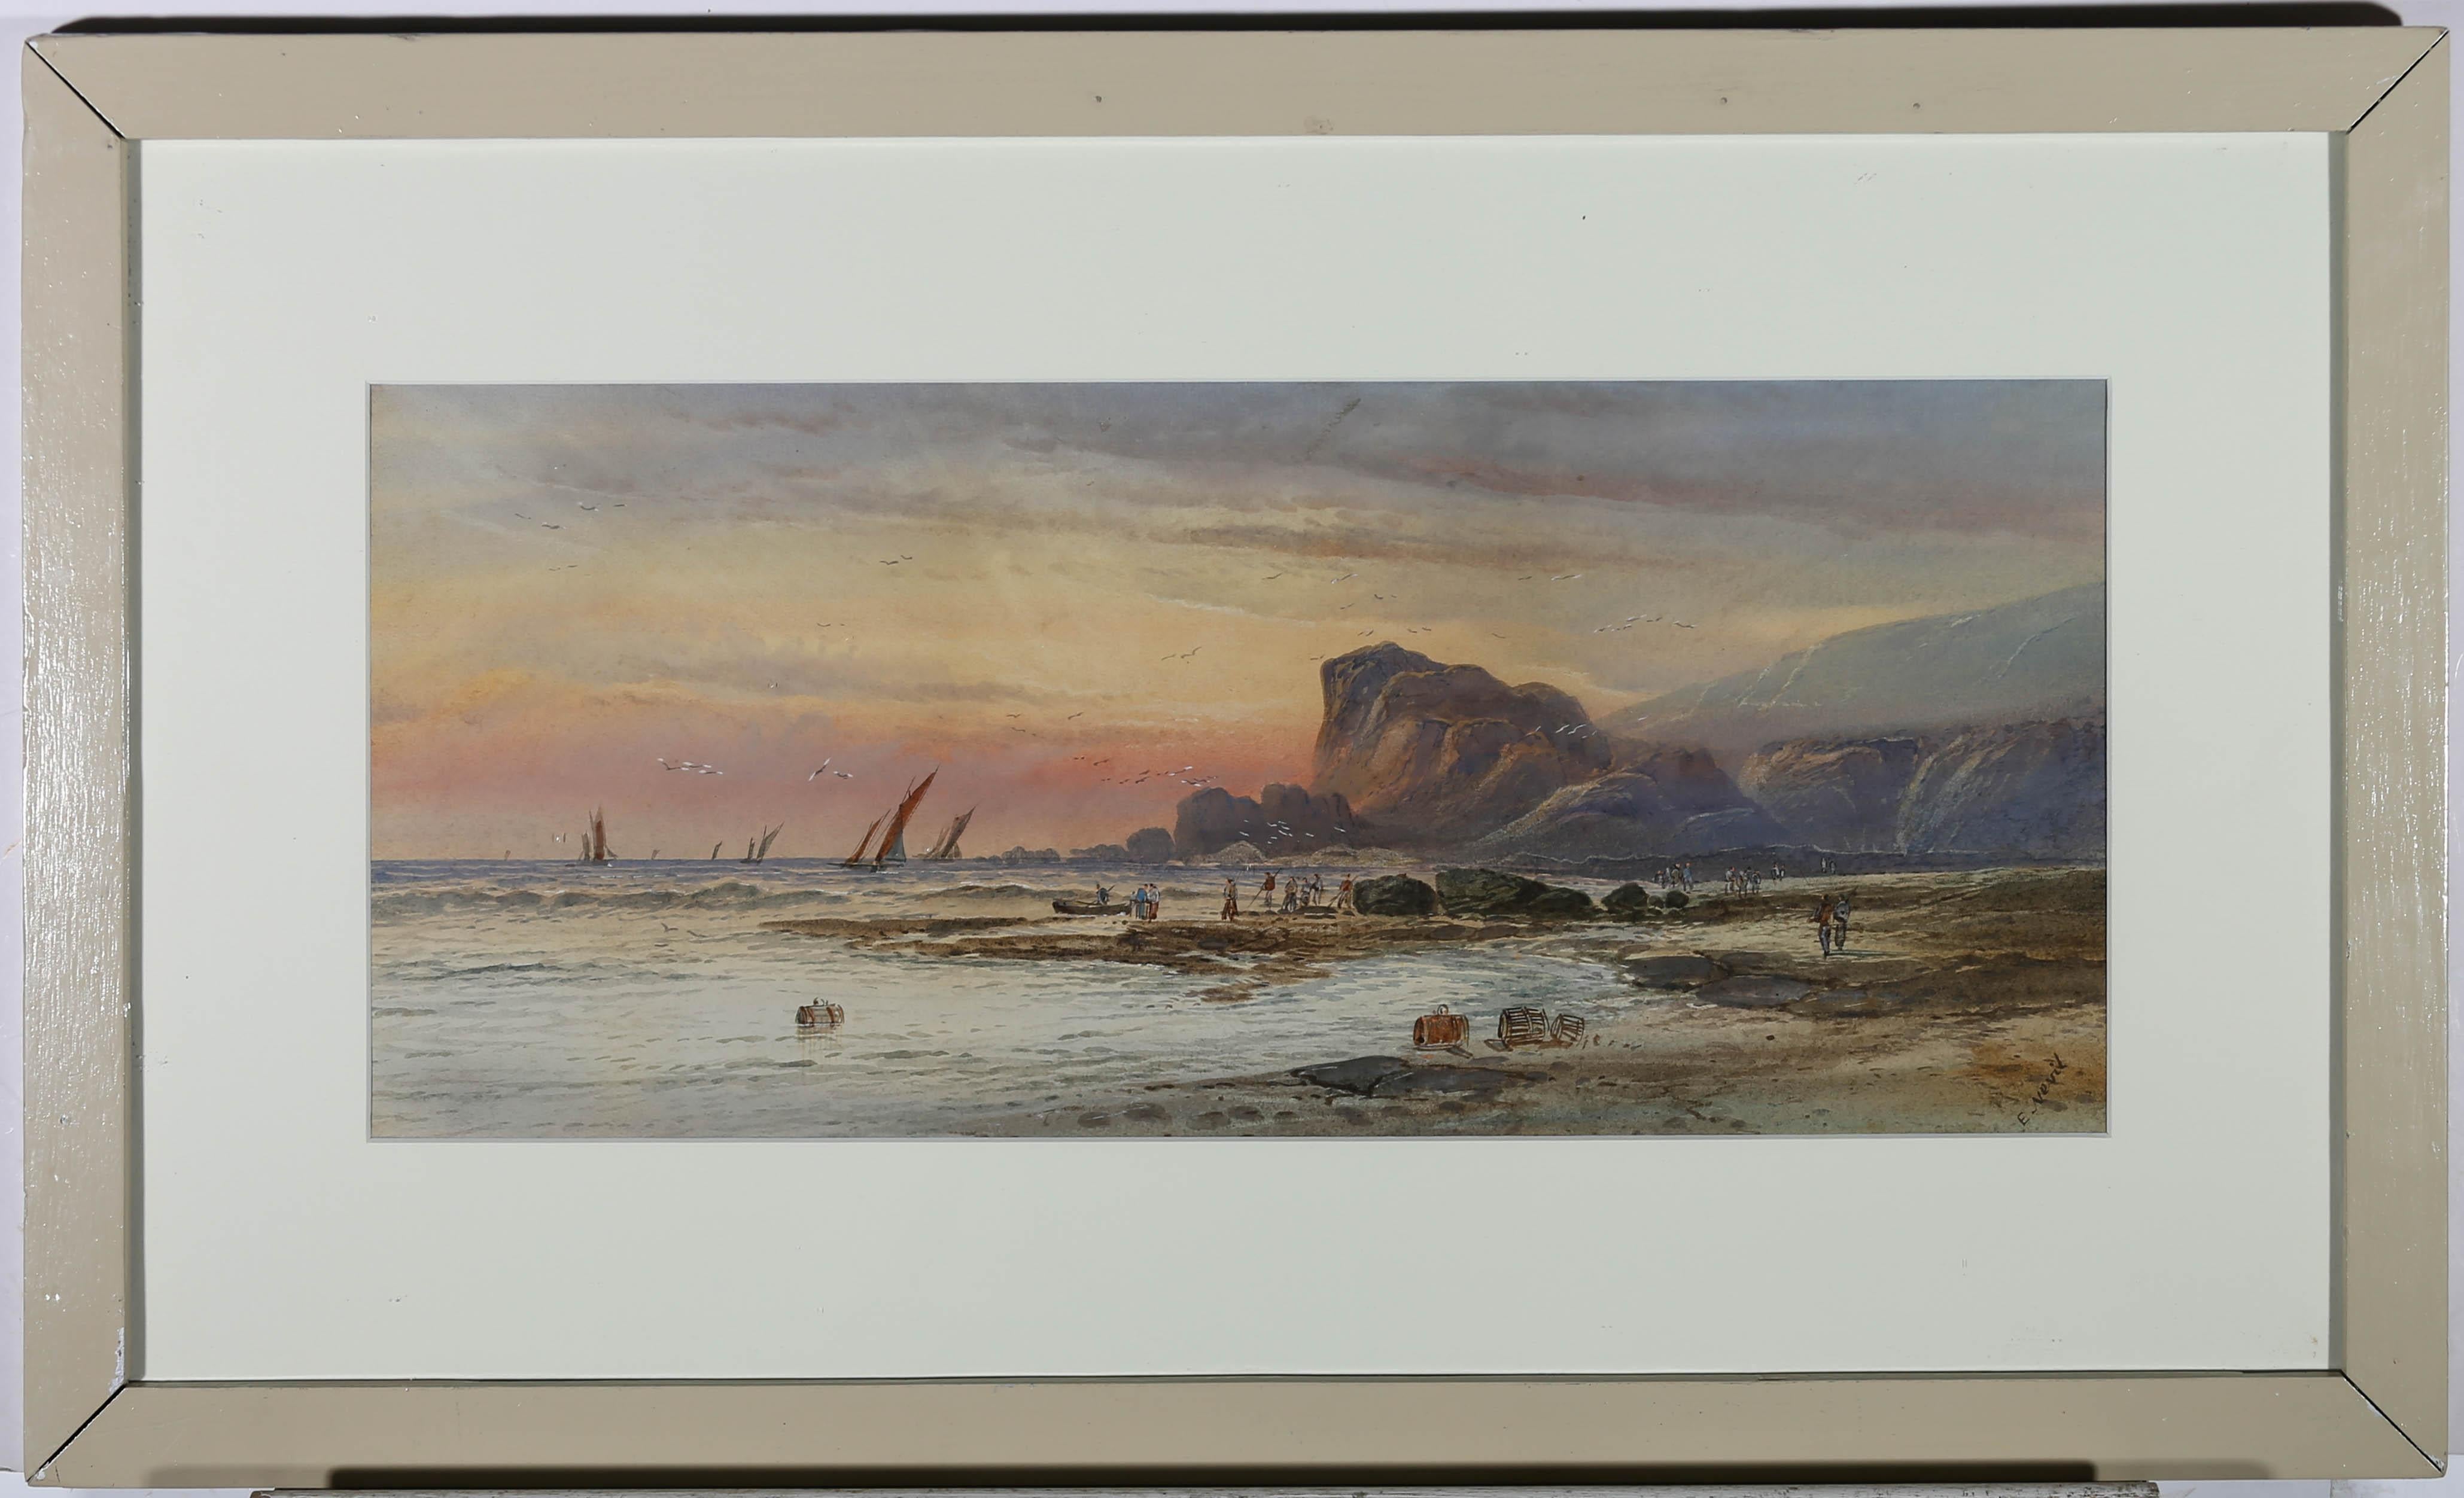 A charming scene depicting figures on the shore fishing for crabs in the rockpools. In the foreground crabbing baskets lie in the shallow water. Signed to the lower right. Part of a pair of coastal scenes by the artist. Presented in a painted wooden